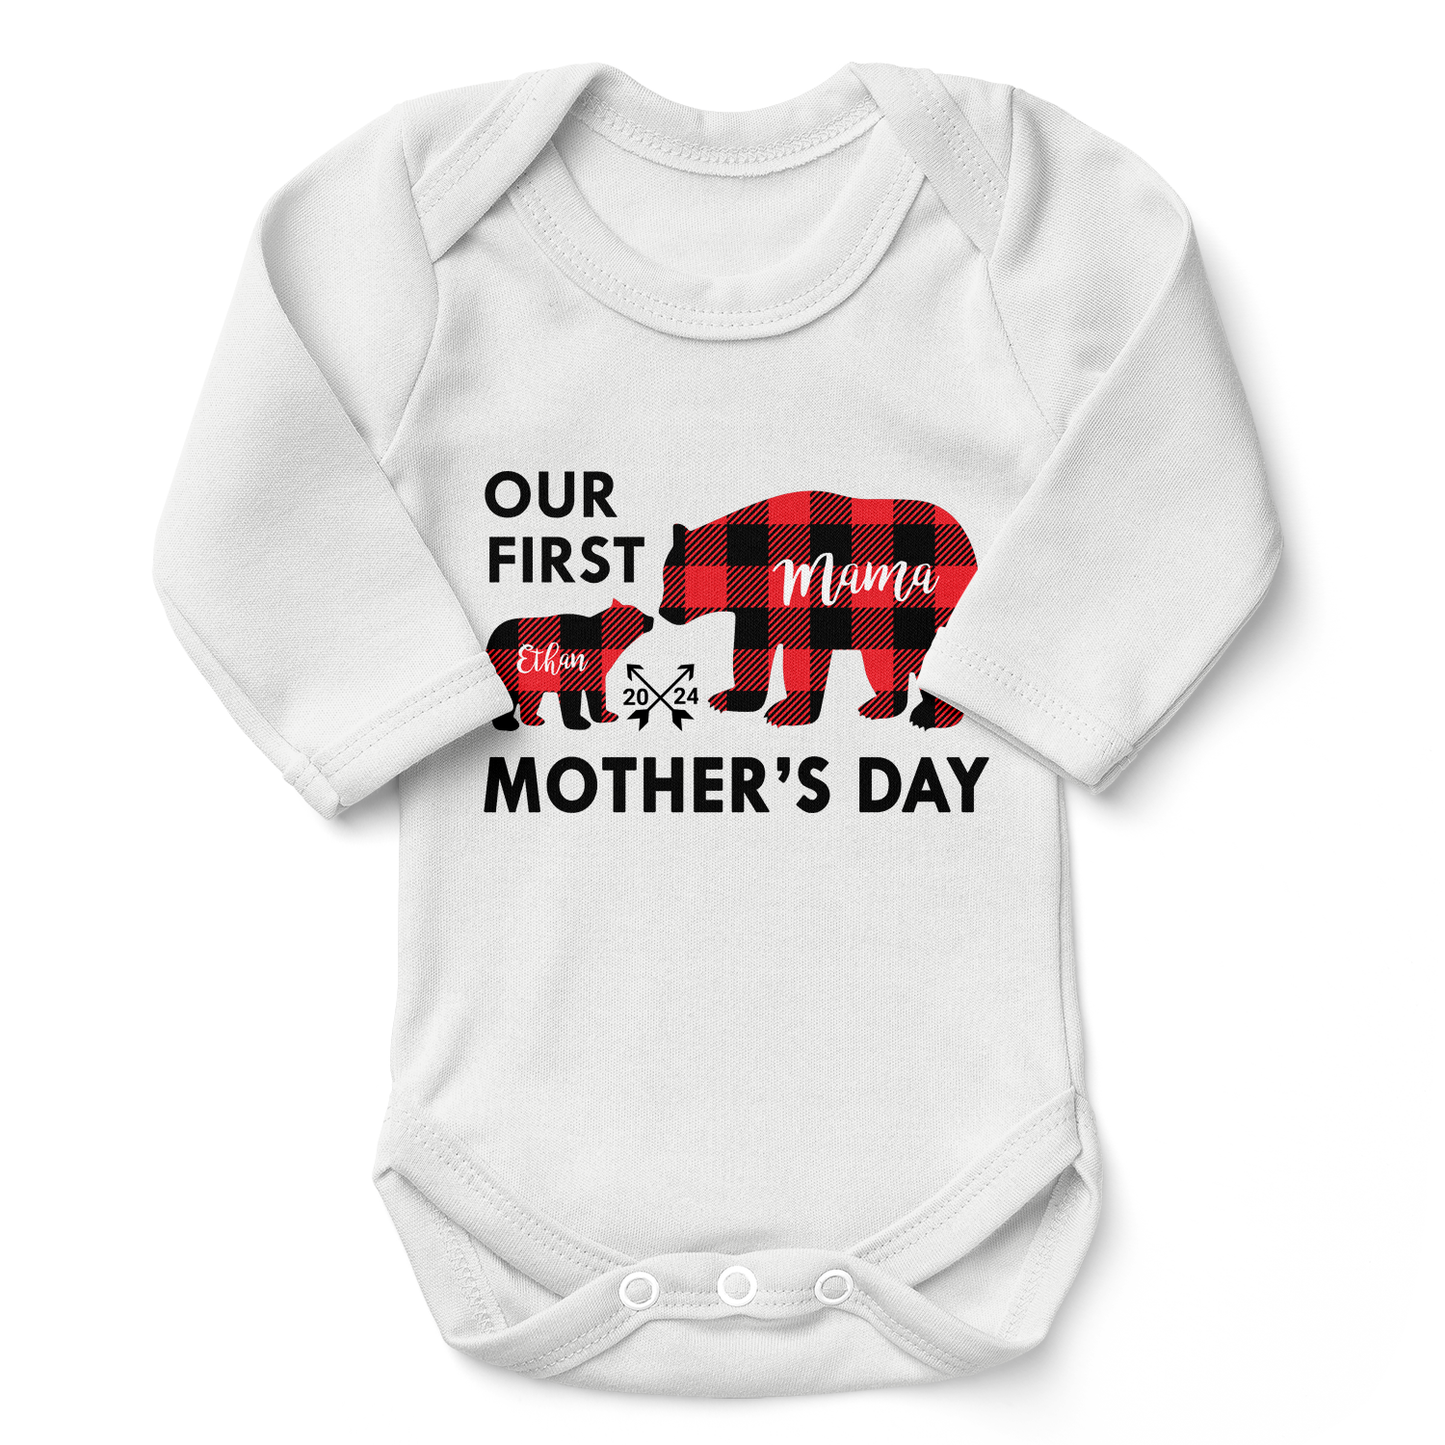 Endanzoo Personalized Matching Mom & Baby Organic Outfits - First Mother's Day 2024 (White)